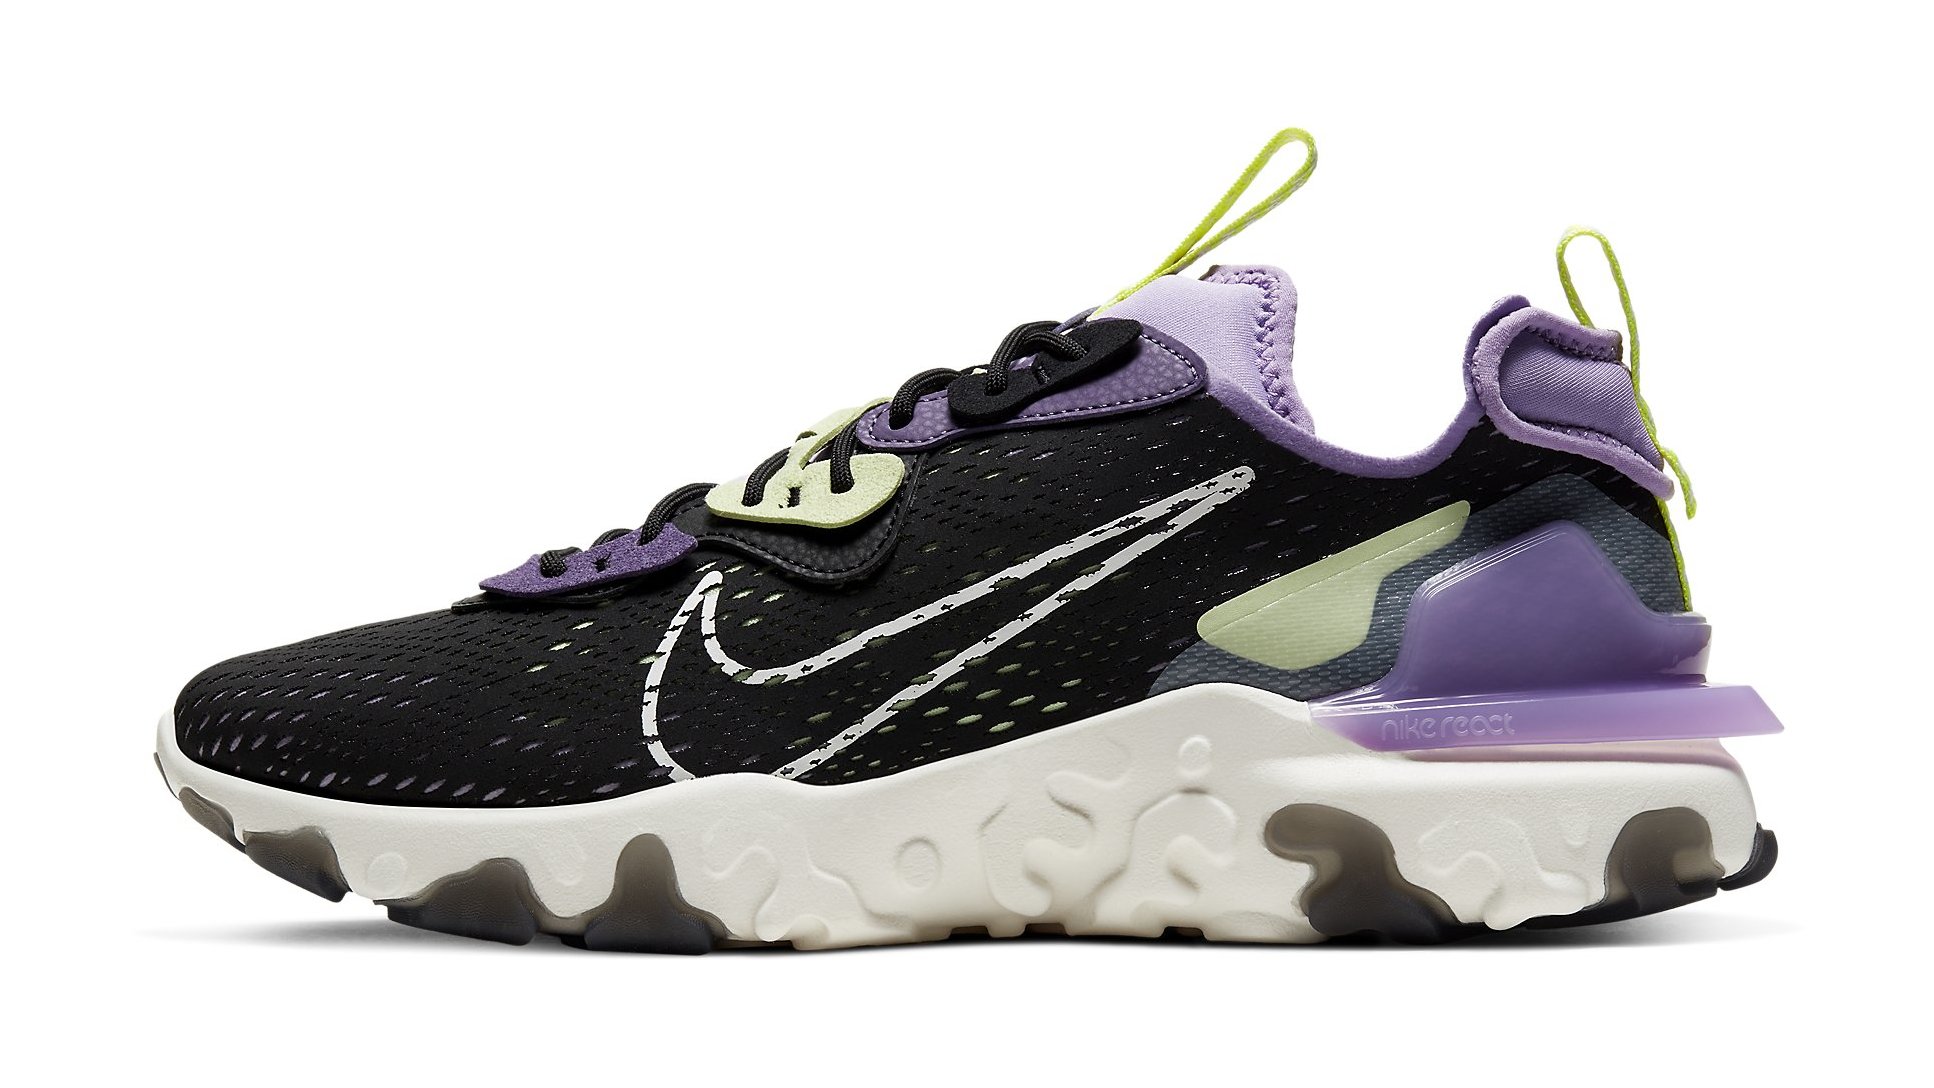 nike react vision gravity purple cd4373 002 lateral